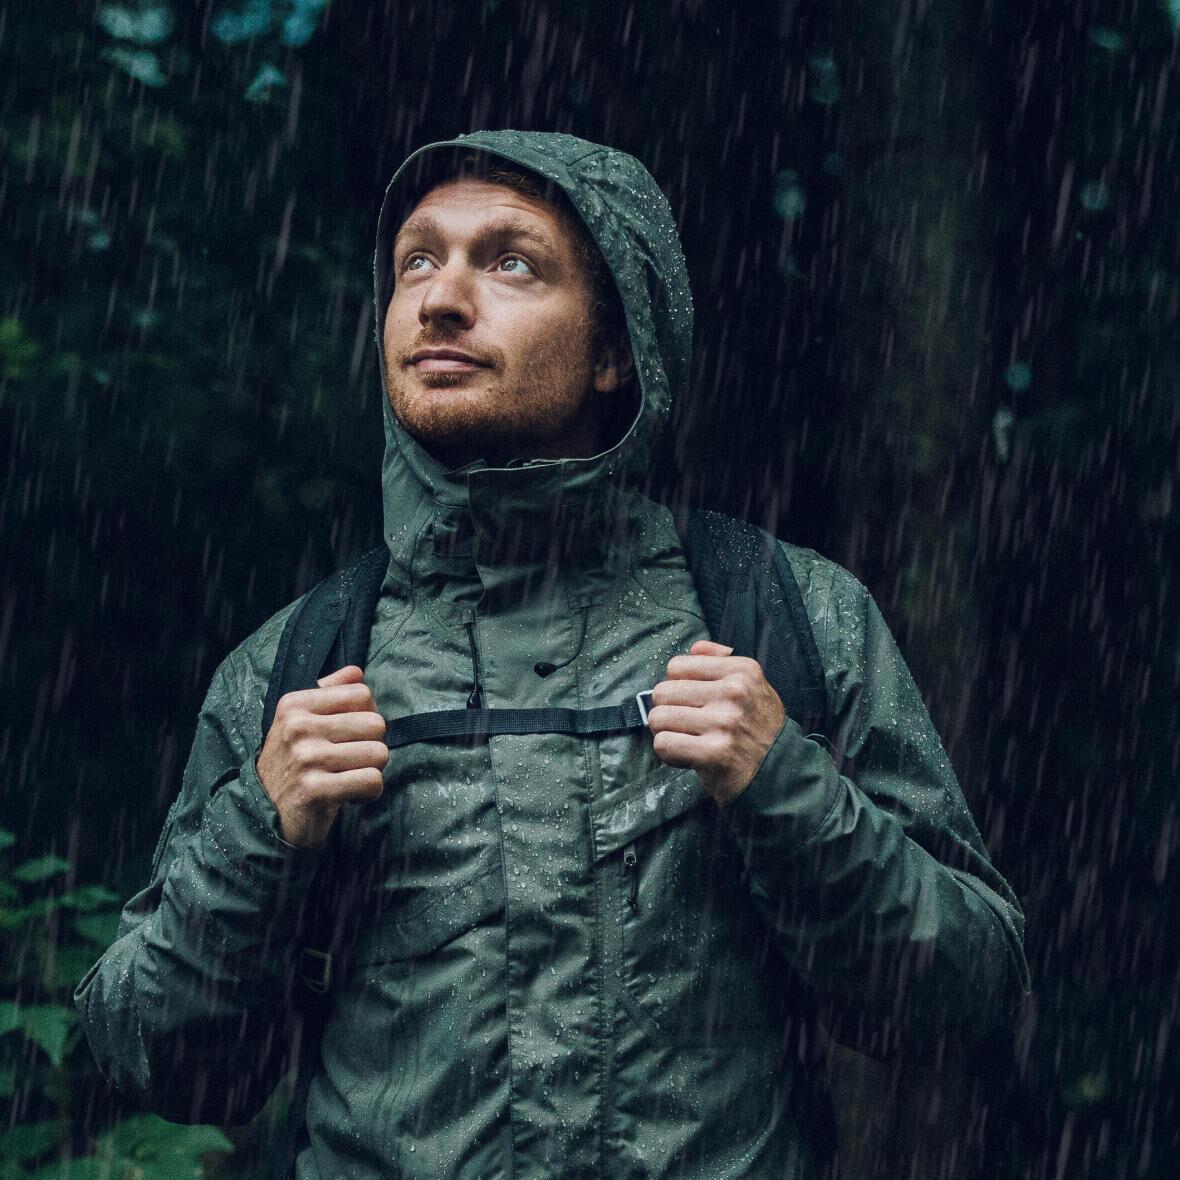 Re-waterproofing: how to reactivate waterproofing on your hiking jacket 